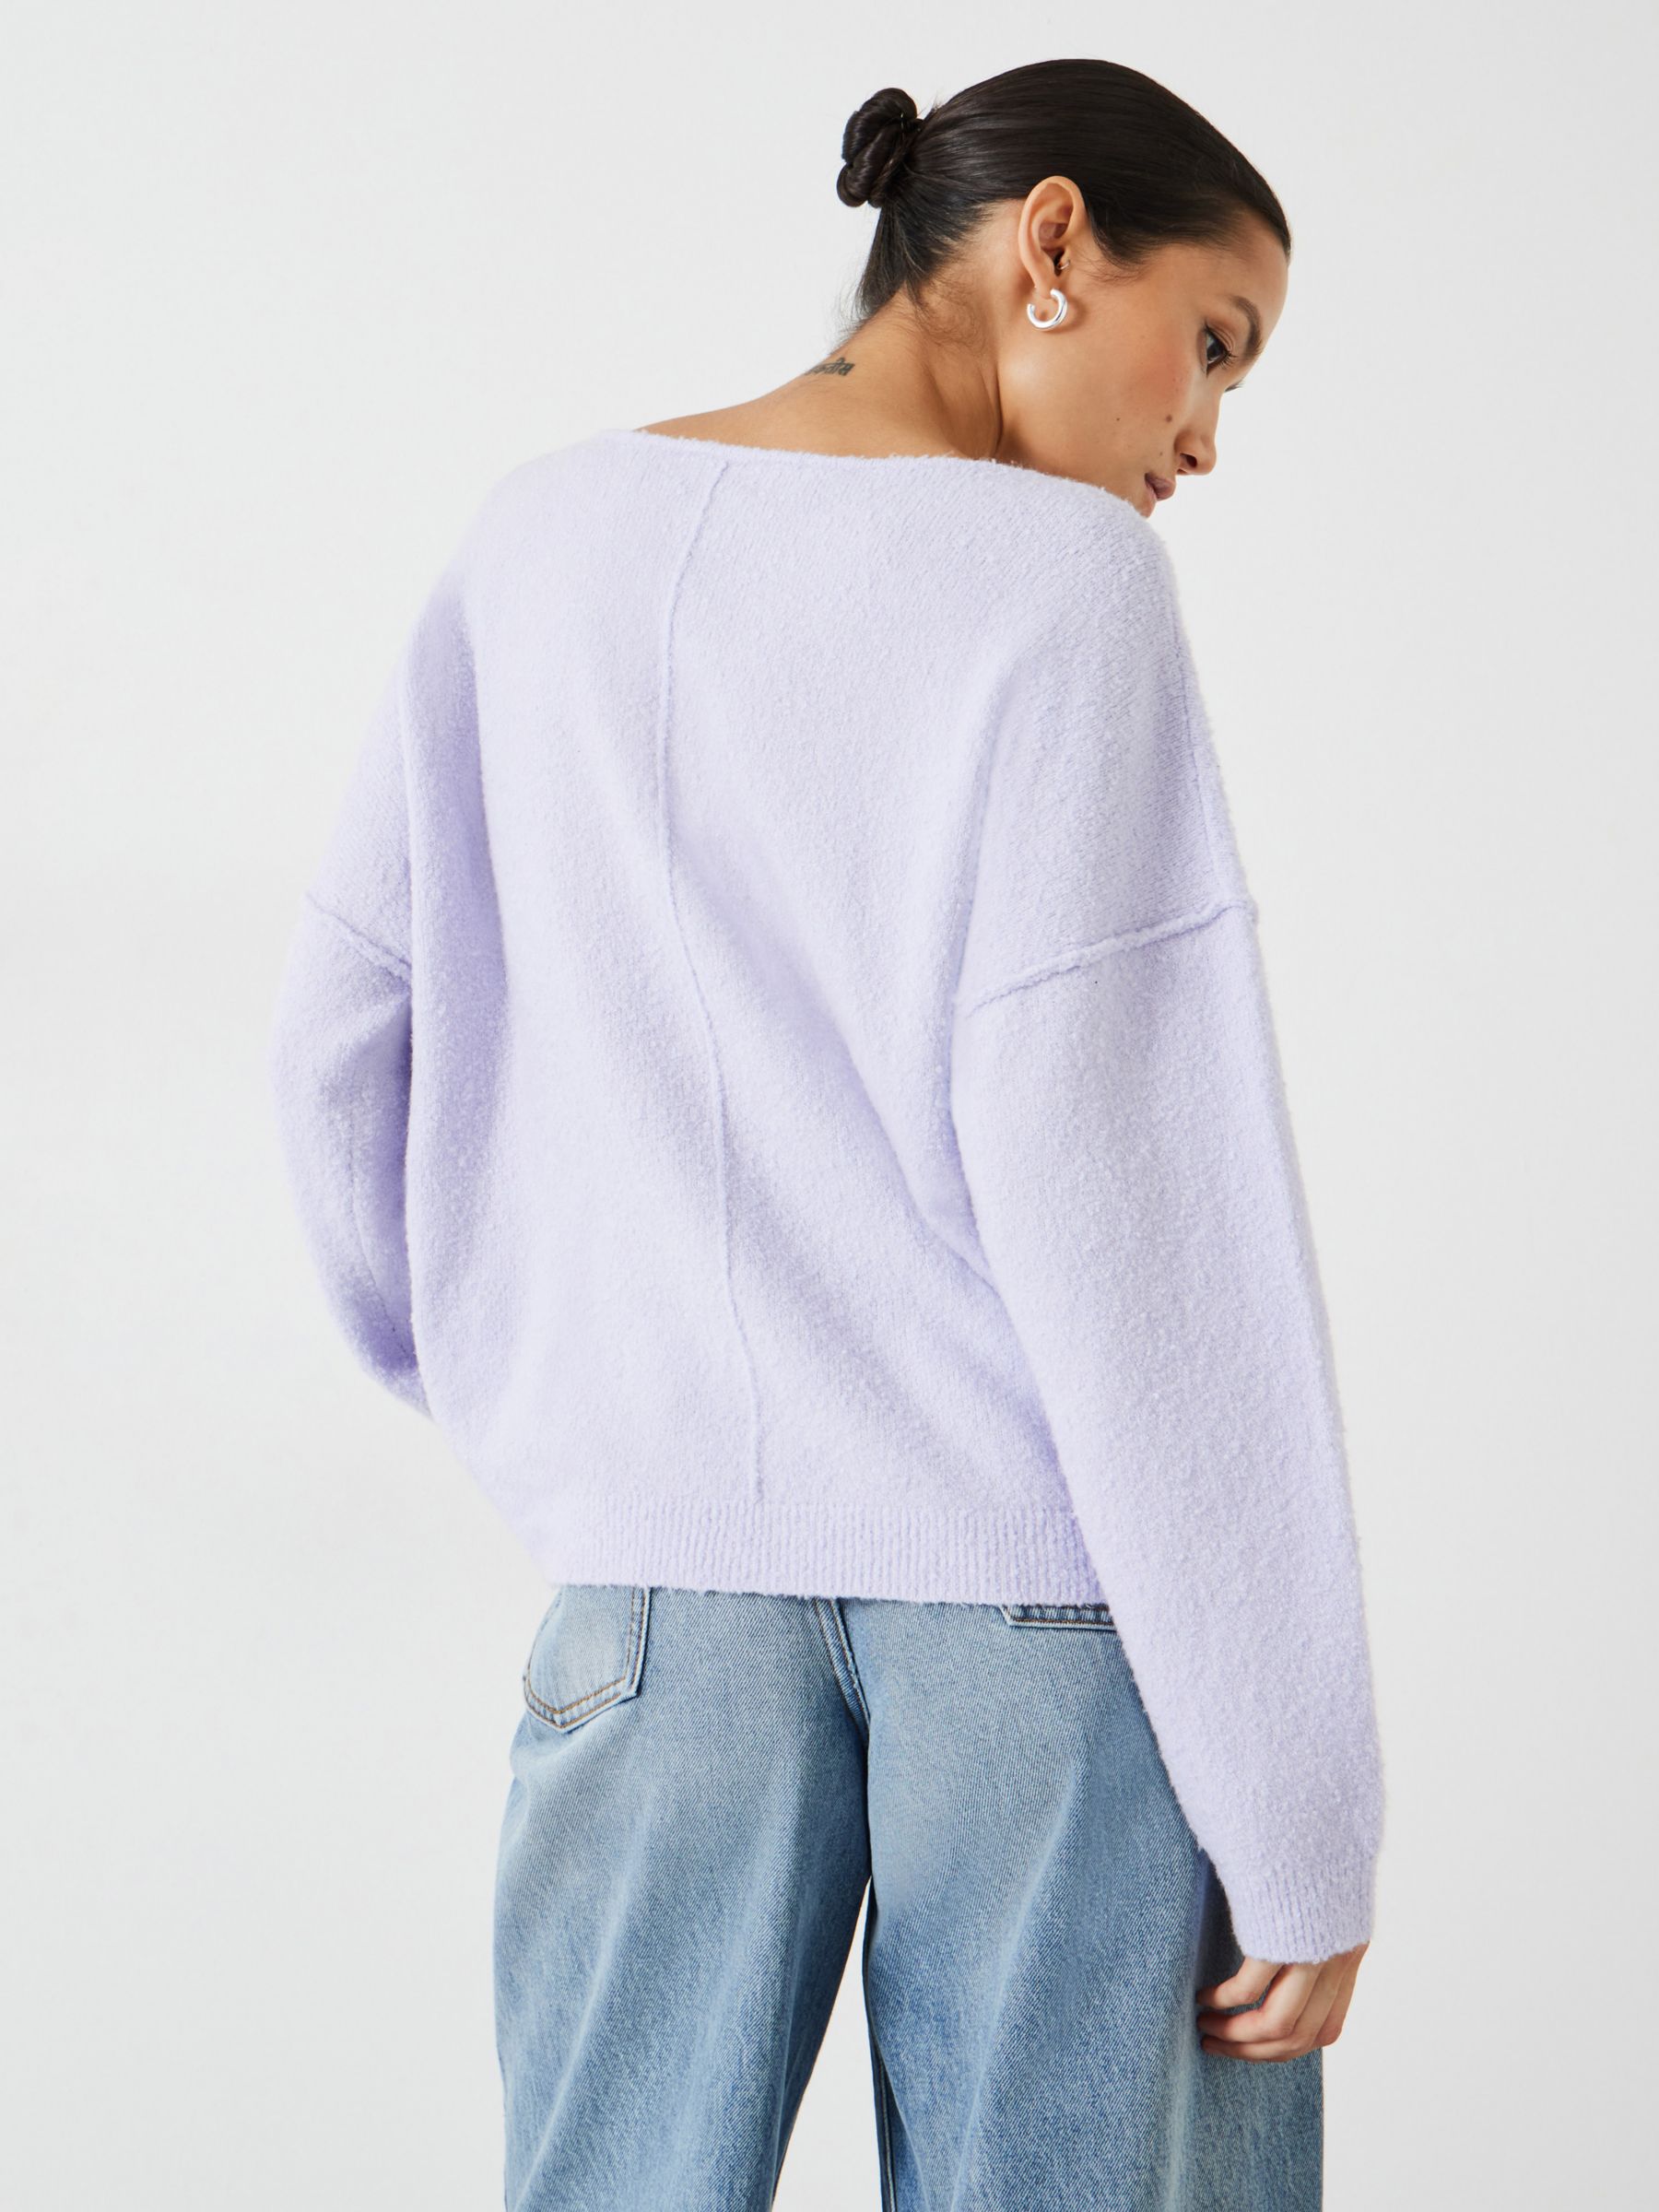 Buy HUSH Lilly Slouchy Fit Wool Blend Jumper Online at johnlewis.com